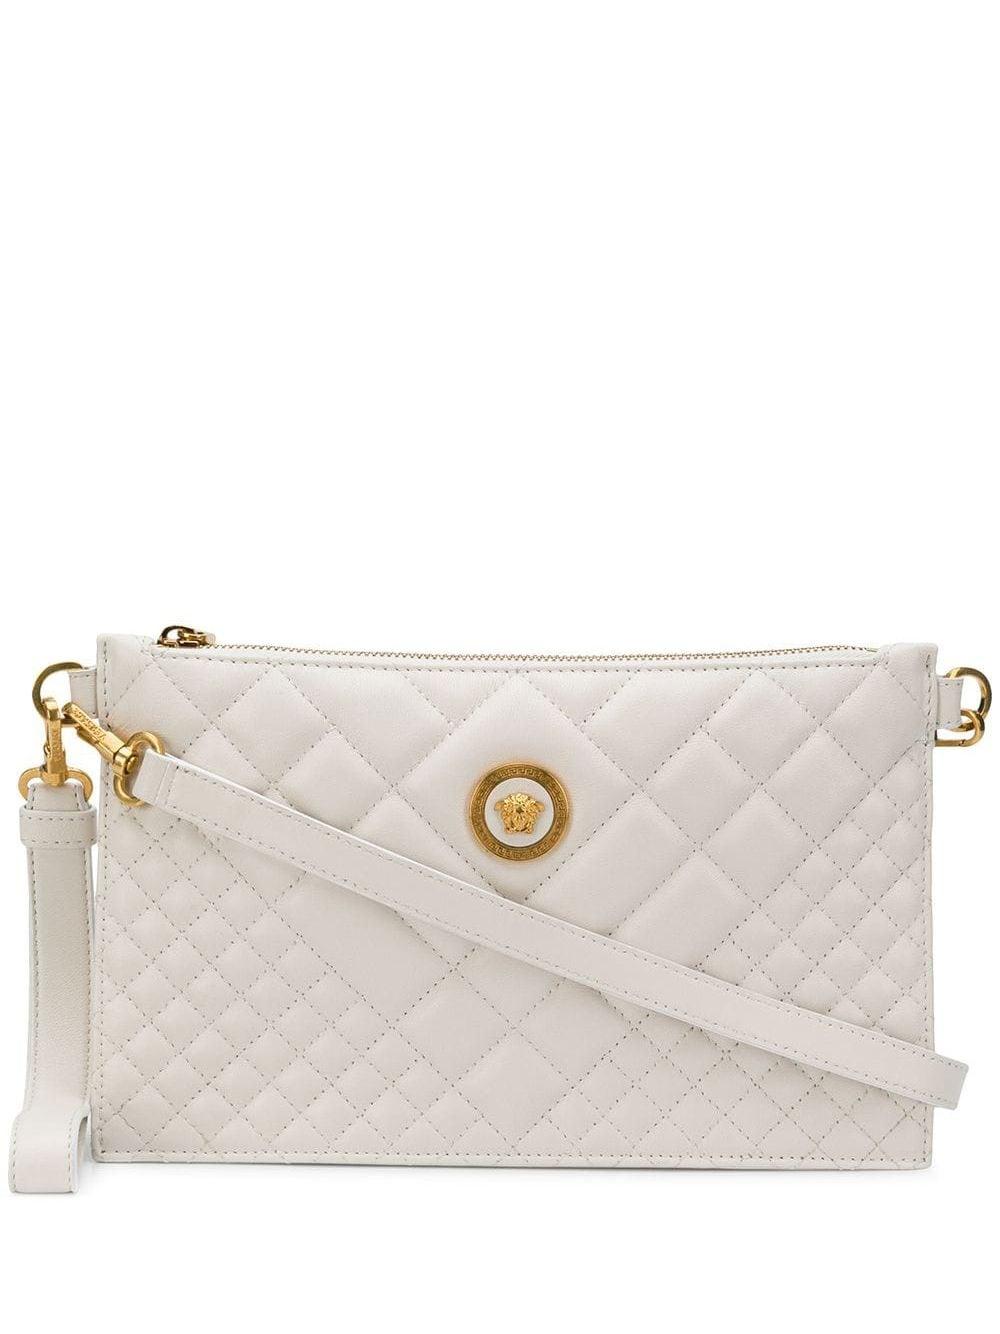 Versace White Clutch | vlr.eng.br